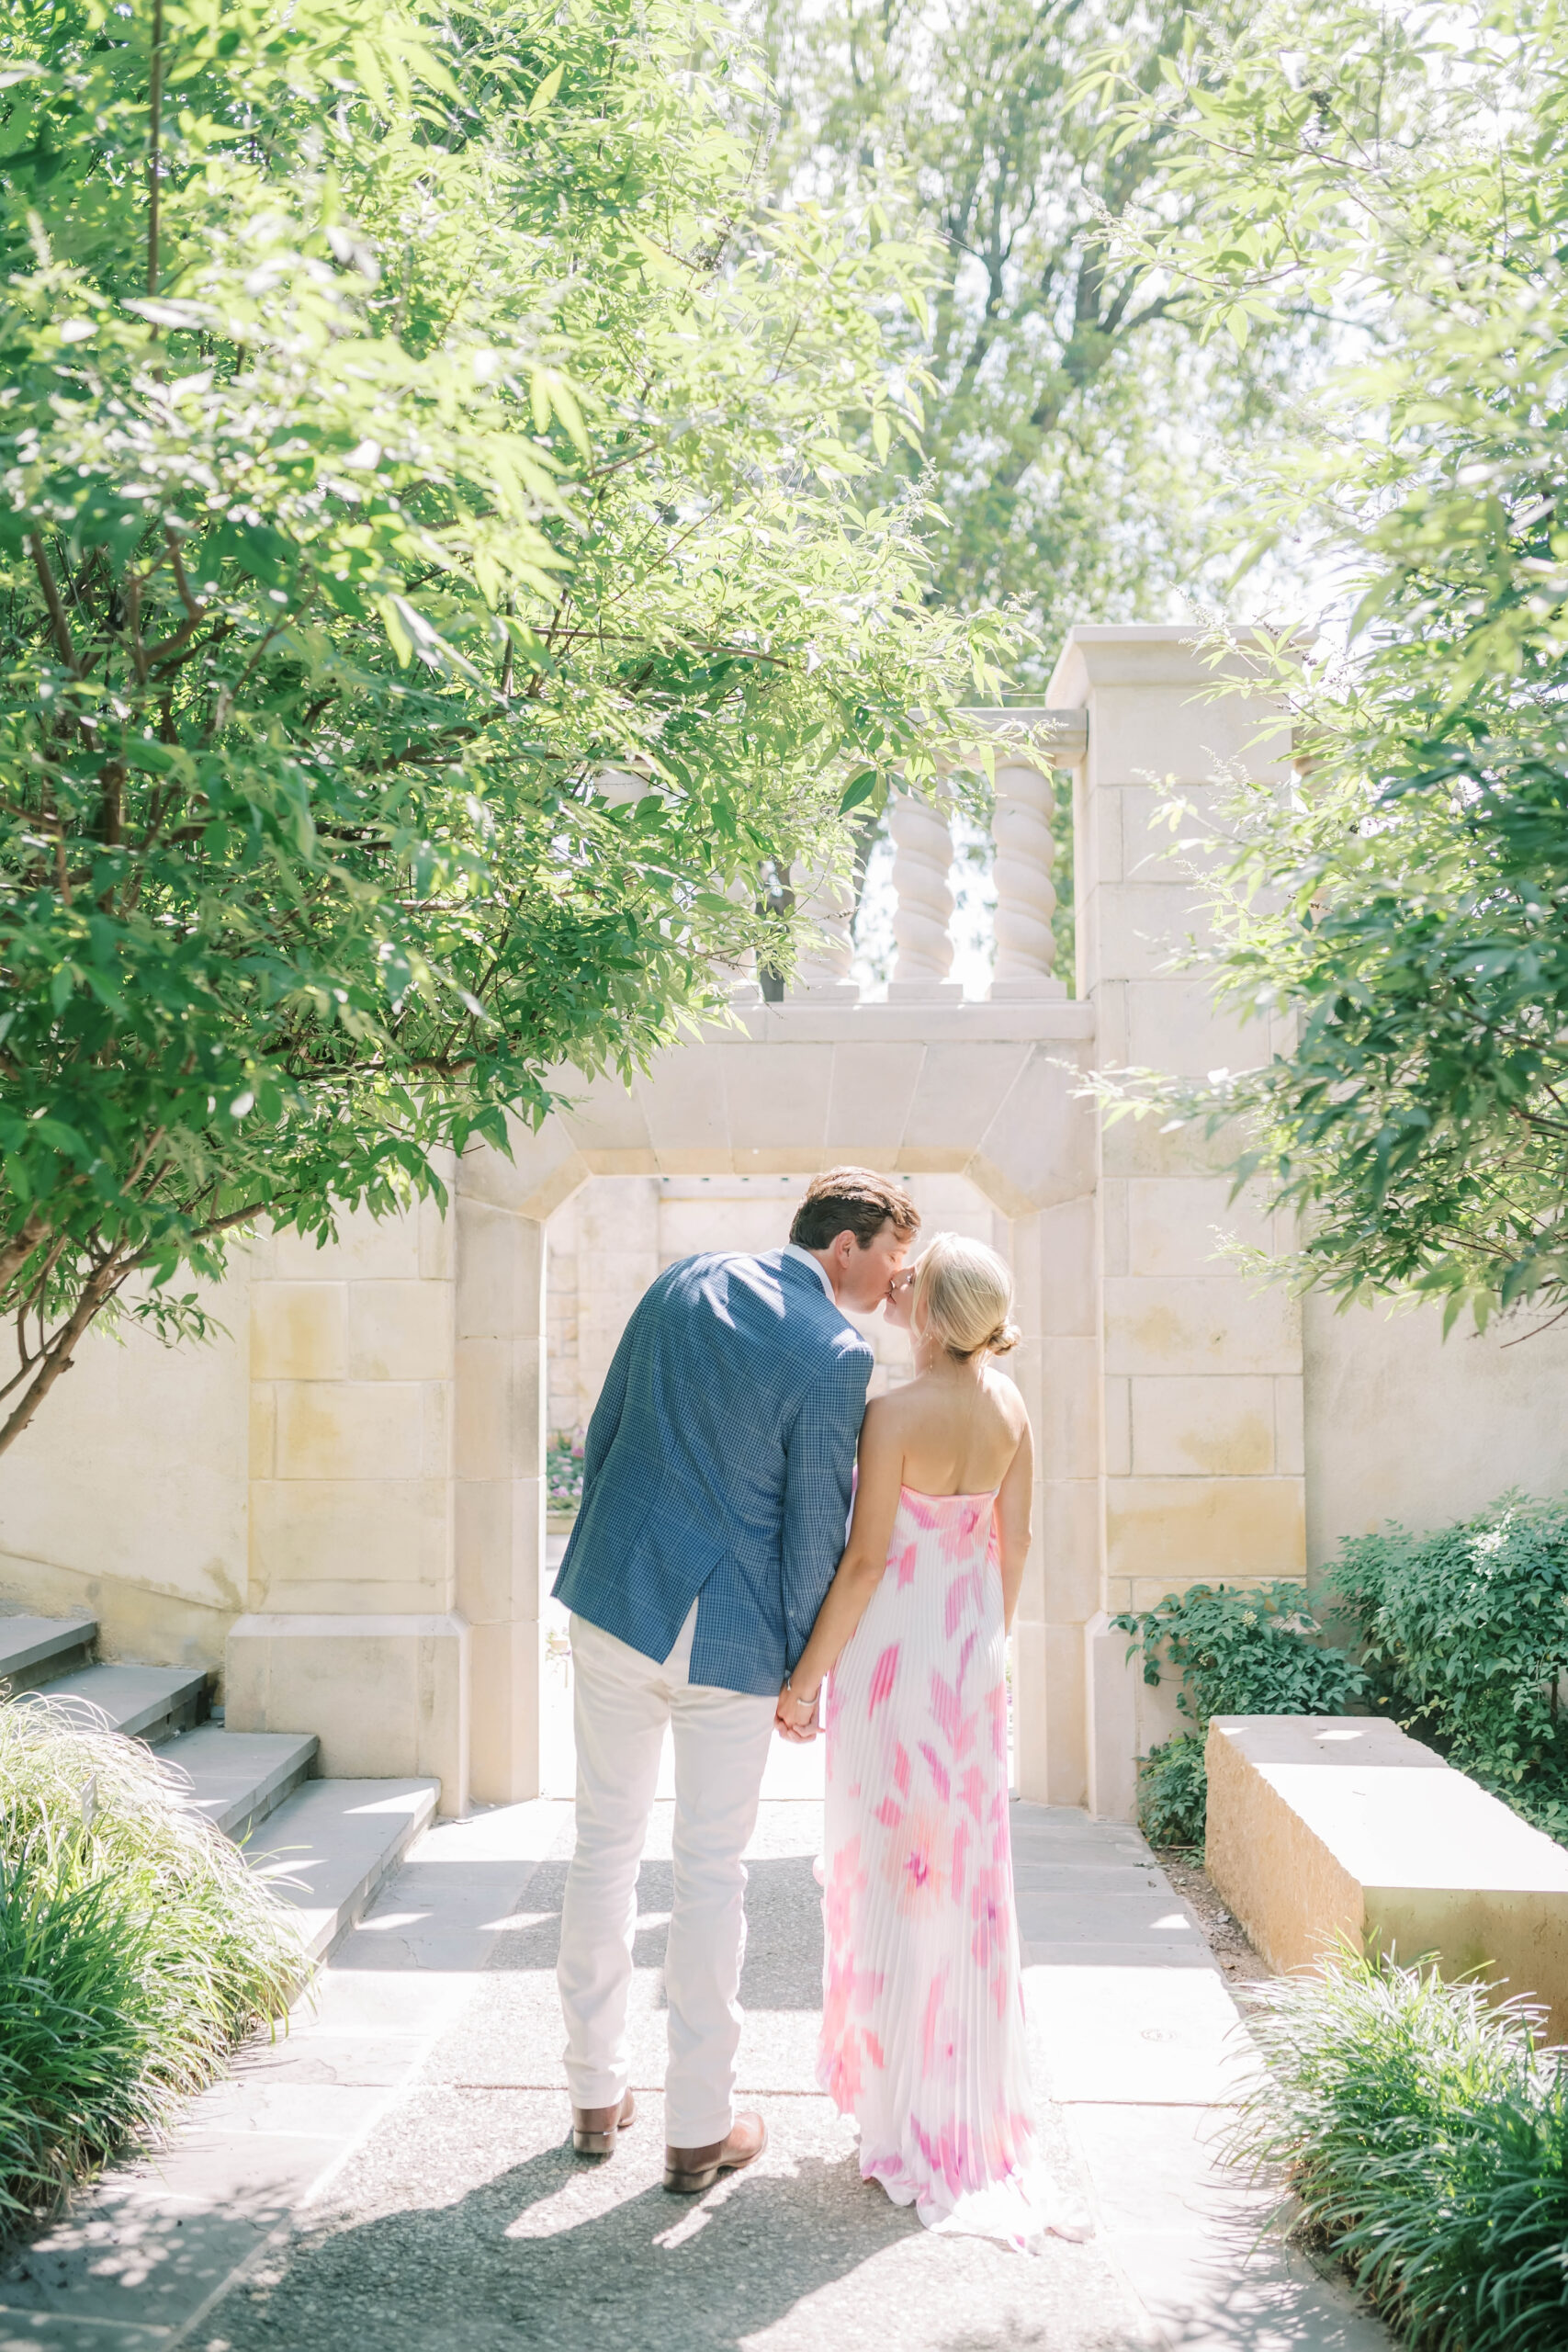 A couple stands together in a garden, the man in a blue jacket and white pants, and the woman in a pink and white dress. They are both smiling and surrounded by greenery and flowers at the dallas arboretum